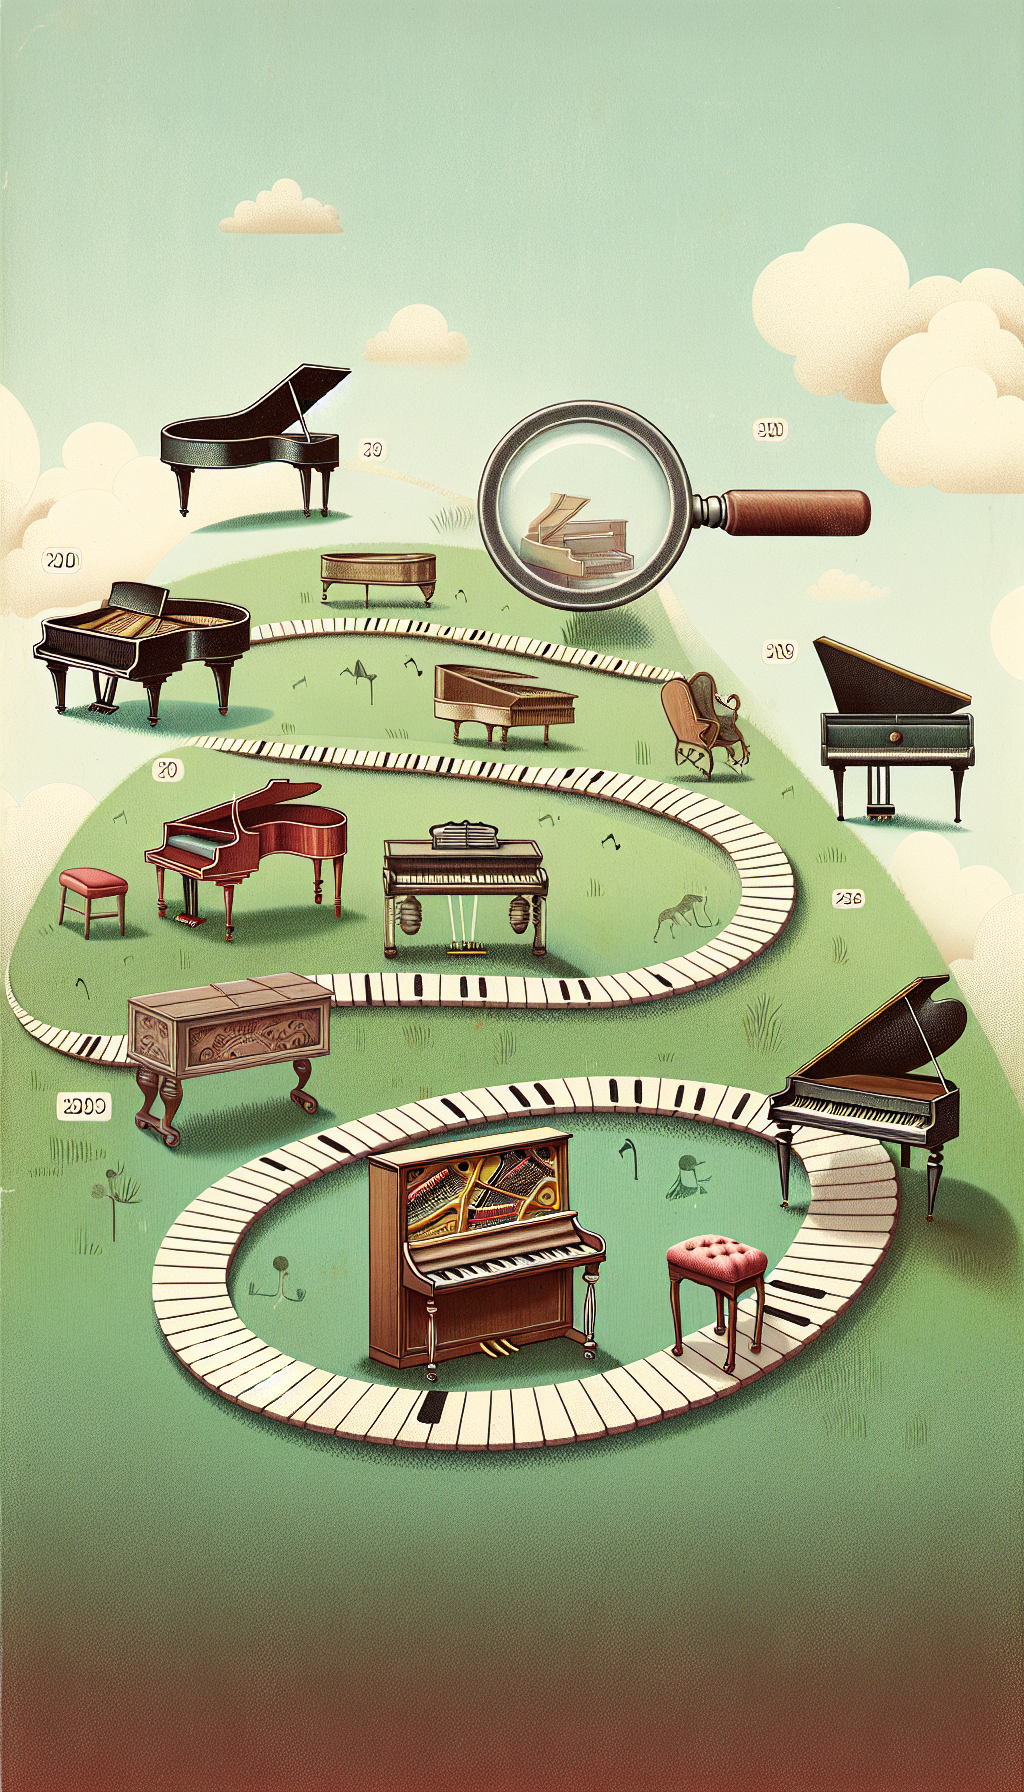 The illustration depicts a whimsical timeline with a piano keyboard path winding through different historical backdrops. At various intervals, pianos of distinct styles—harpsichord, fortepiano, and grand piano—emerge, each adorned with a magnifying glass highlighting unique features such as legs, strings, and hammers, symbolizing the subtle art of antique piano identification.